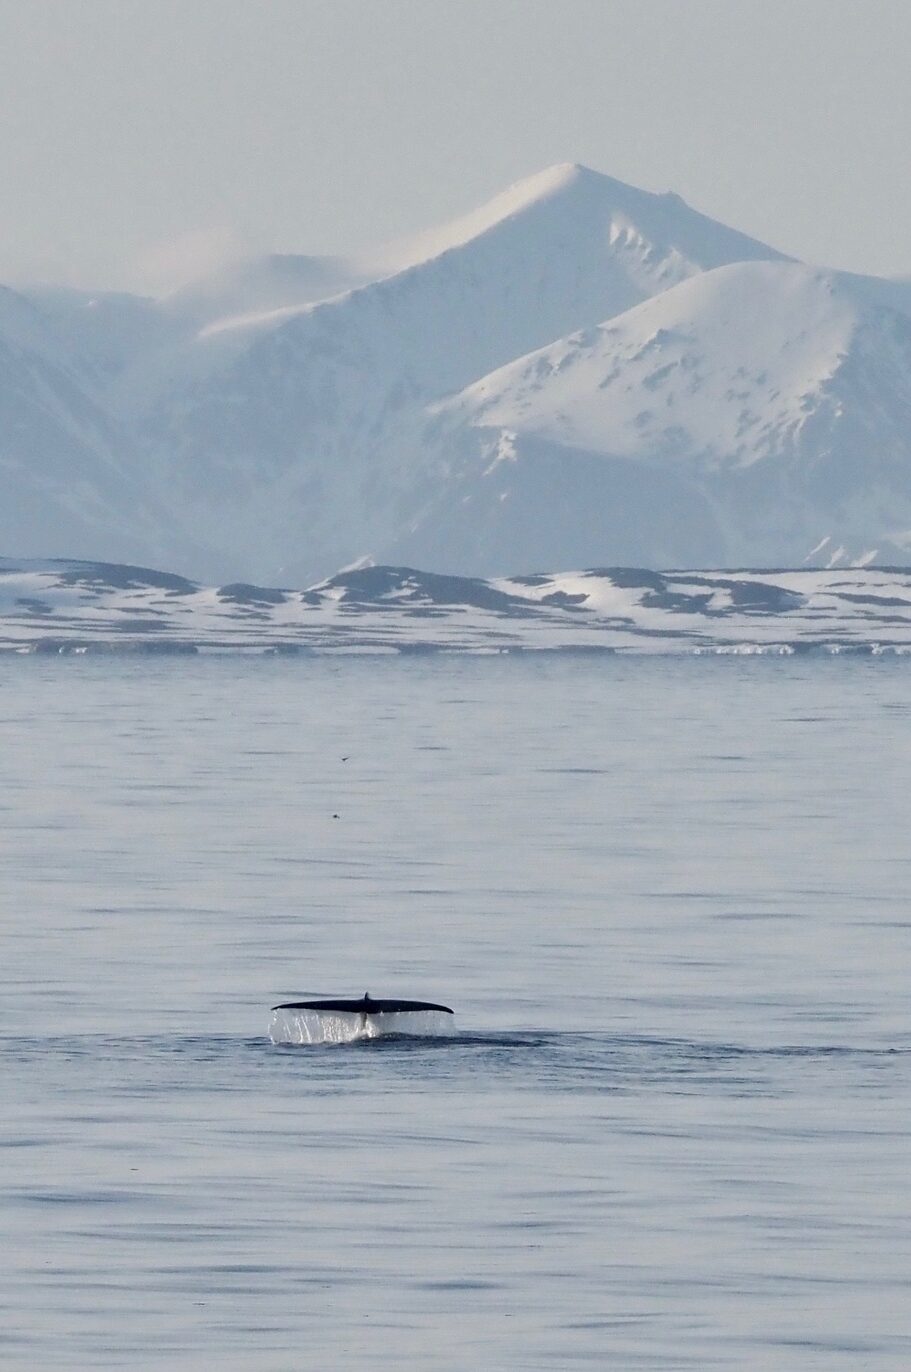 Whale sighting during an arctic journey